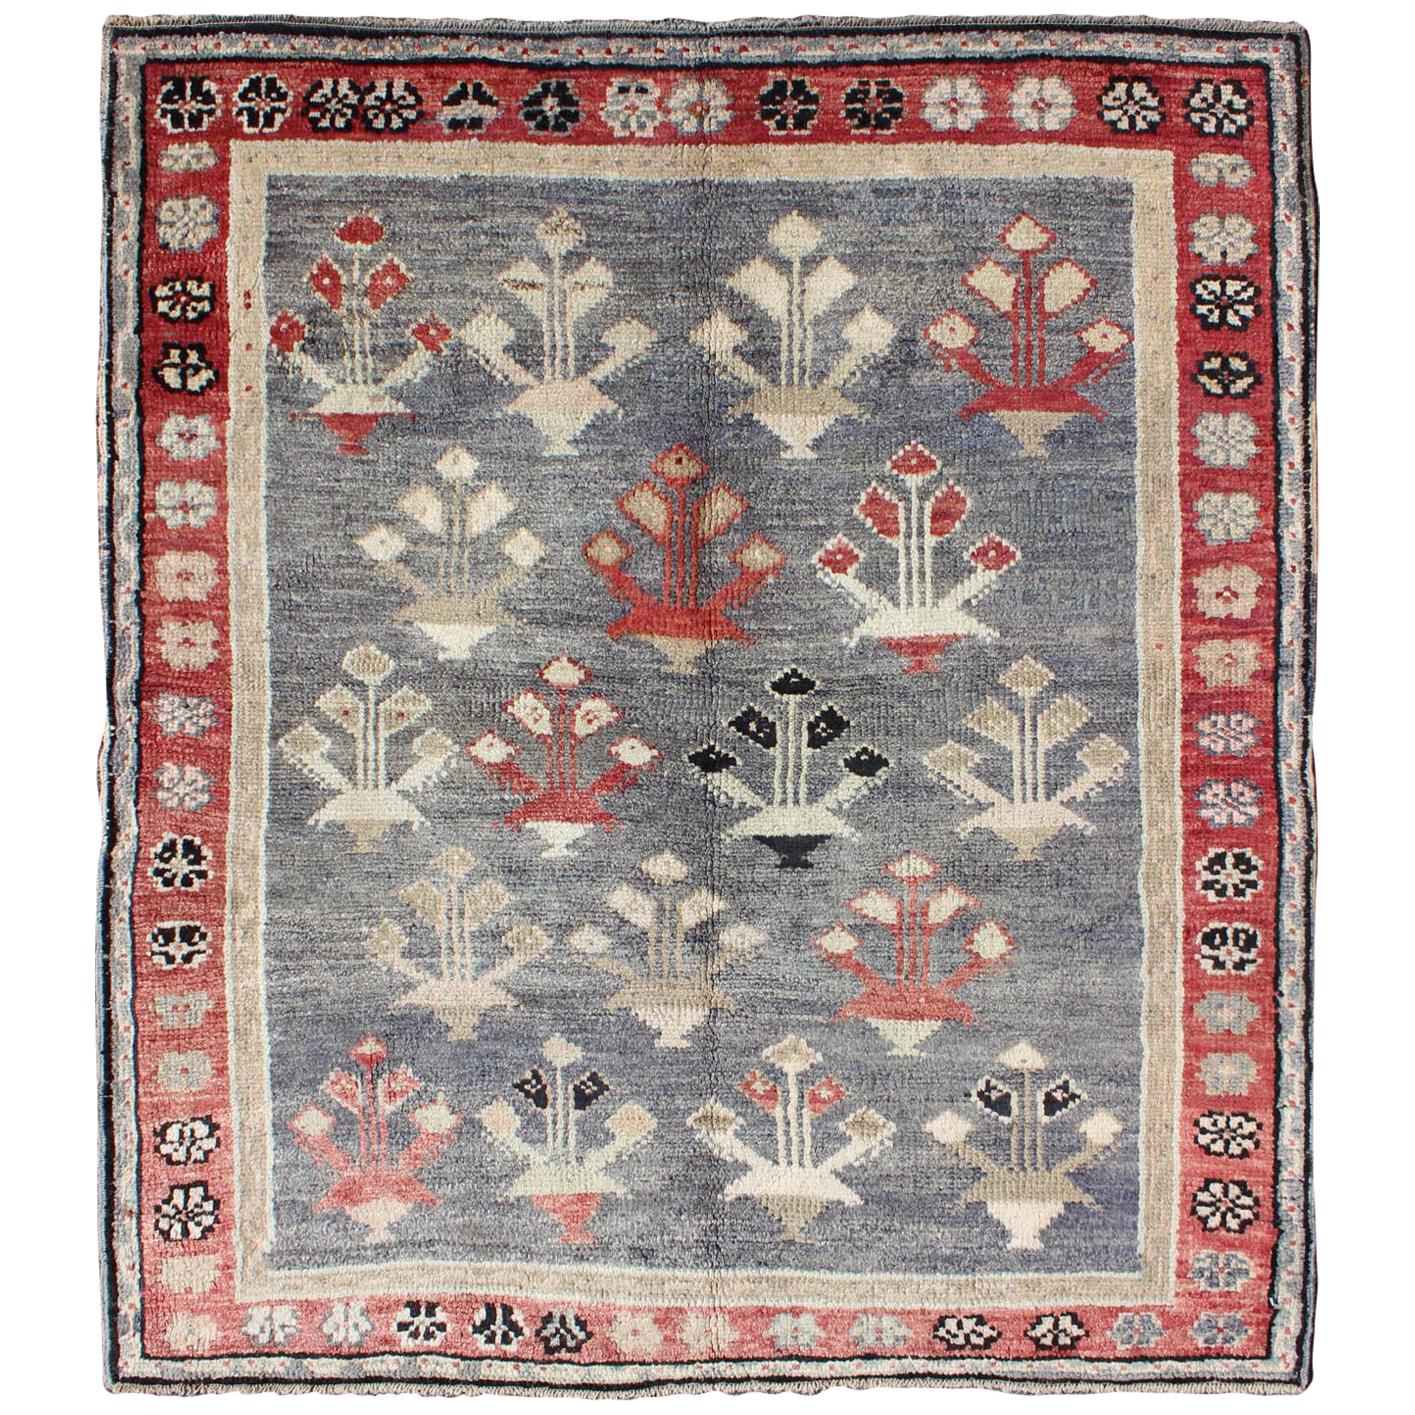 Vintage Turkish Oushak Rug in Red, Gray, Blue-Gray, Taupe and Ivory